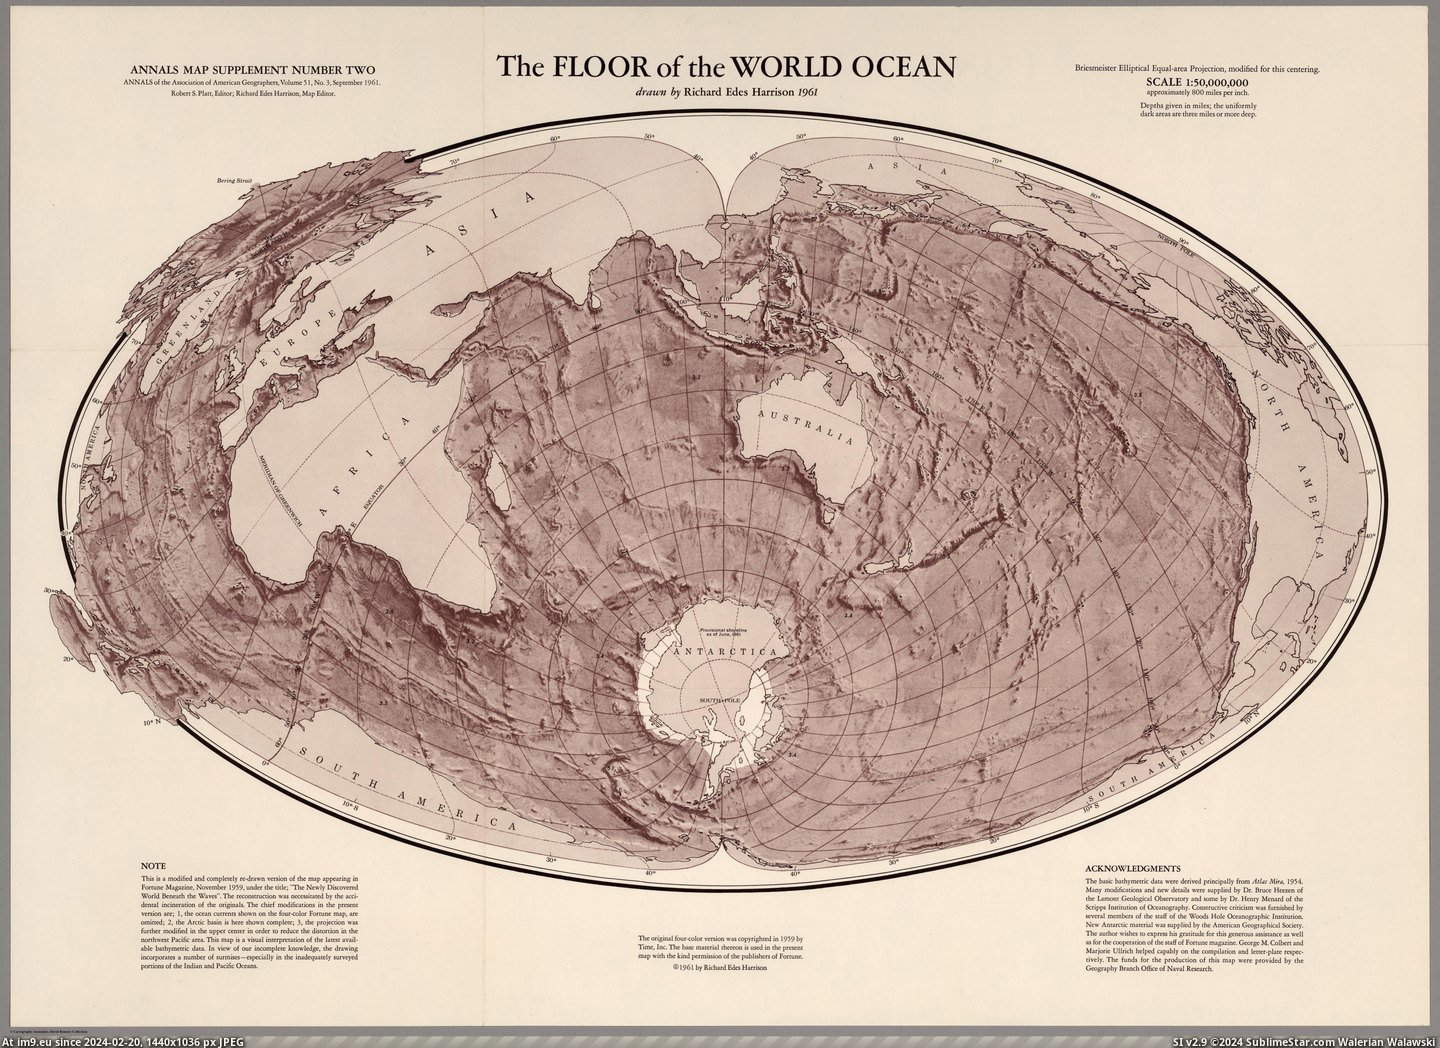 #World #Area #Floor #Harrison #Equal #Ocean #Richard #Projection [Mapporn] The Floor of the World Ocean, a Briesmeister Elliptical Equal-area Projection, made in 1961 by Richard Edes Harrison [ Pic. (Image of album My r/MAPS favs))